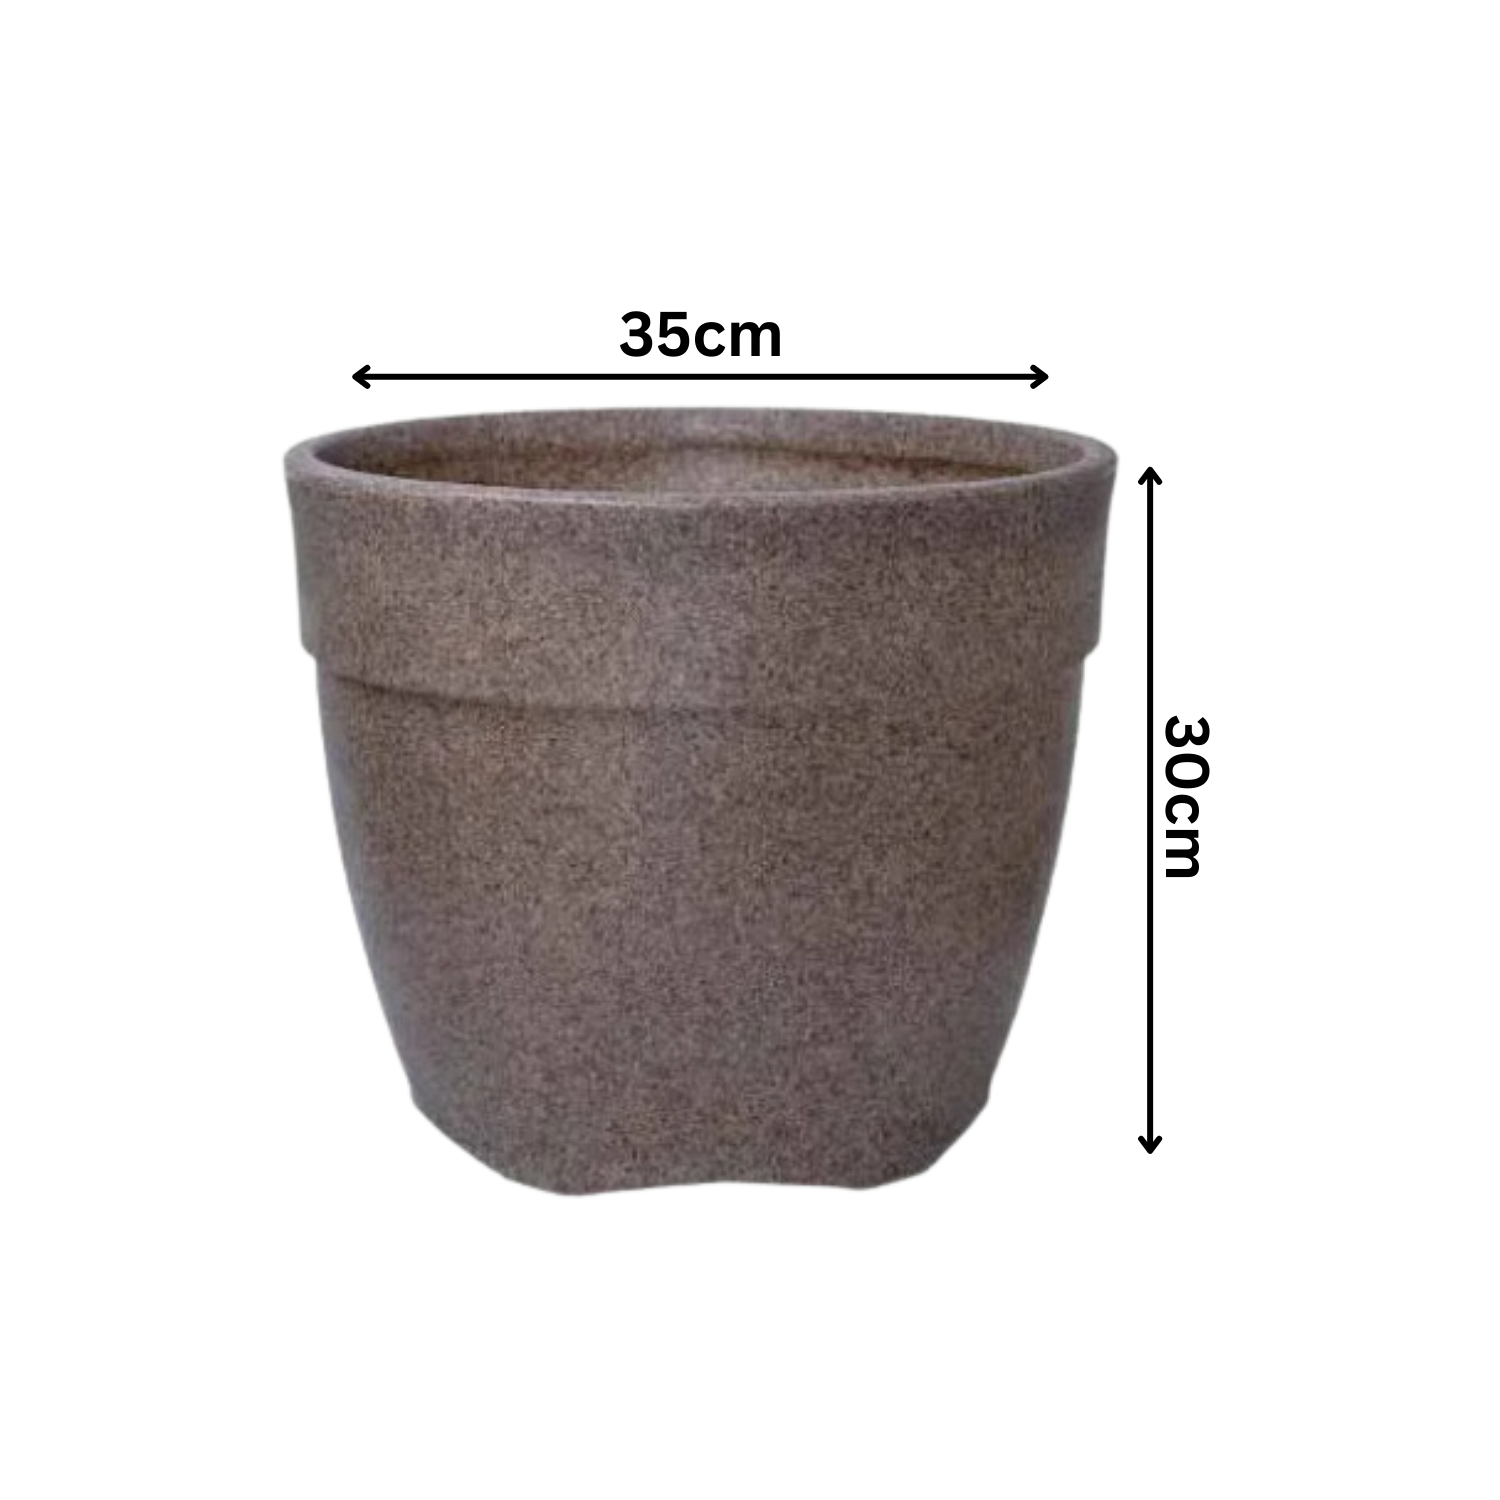 Hug A Plant | Barca Round Rotomolded Plastic Pot for Home & Garden (Sand Stone Finish, Pack of 1)